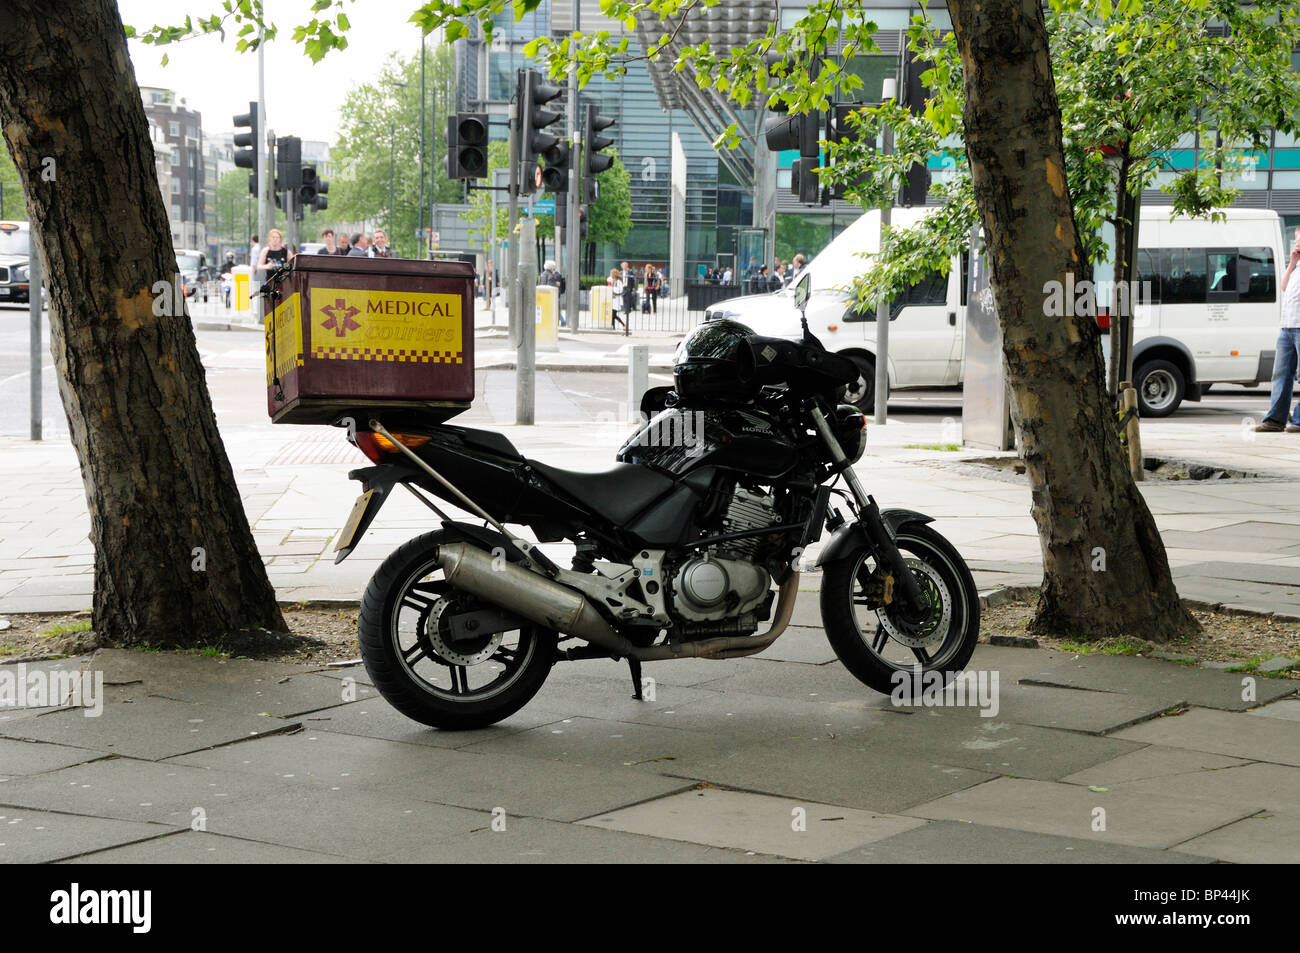 Medical Couriers Motorbike parked on pavement Euston Road London England Britain UK Stock Photo